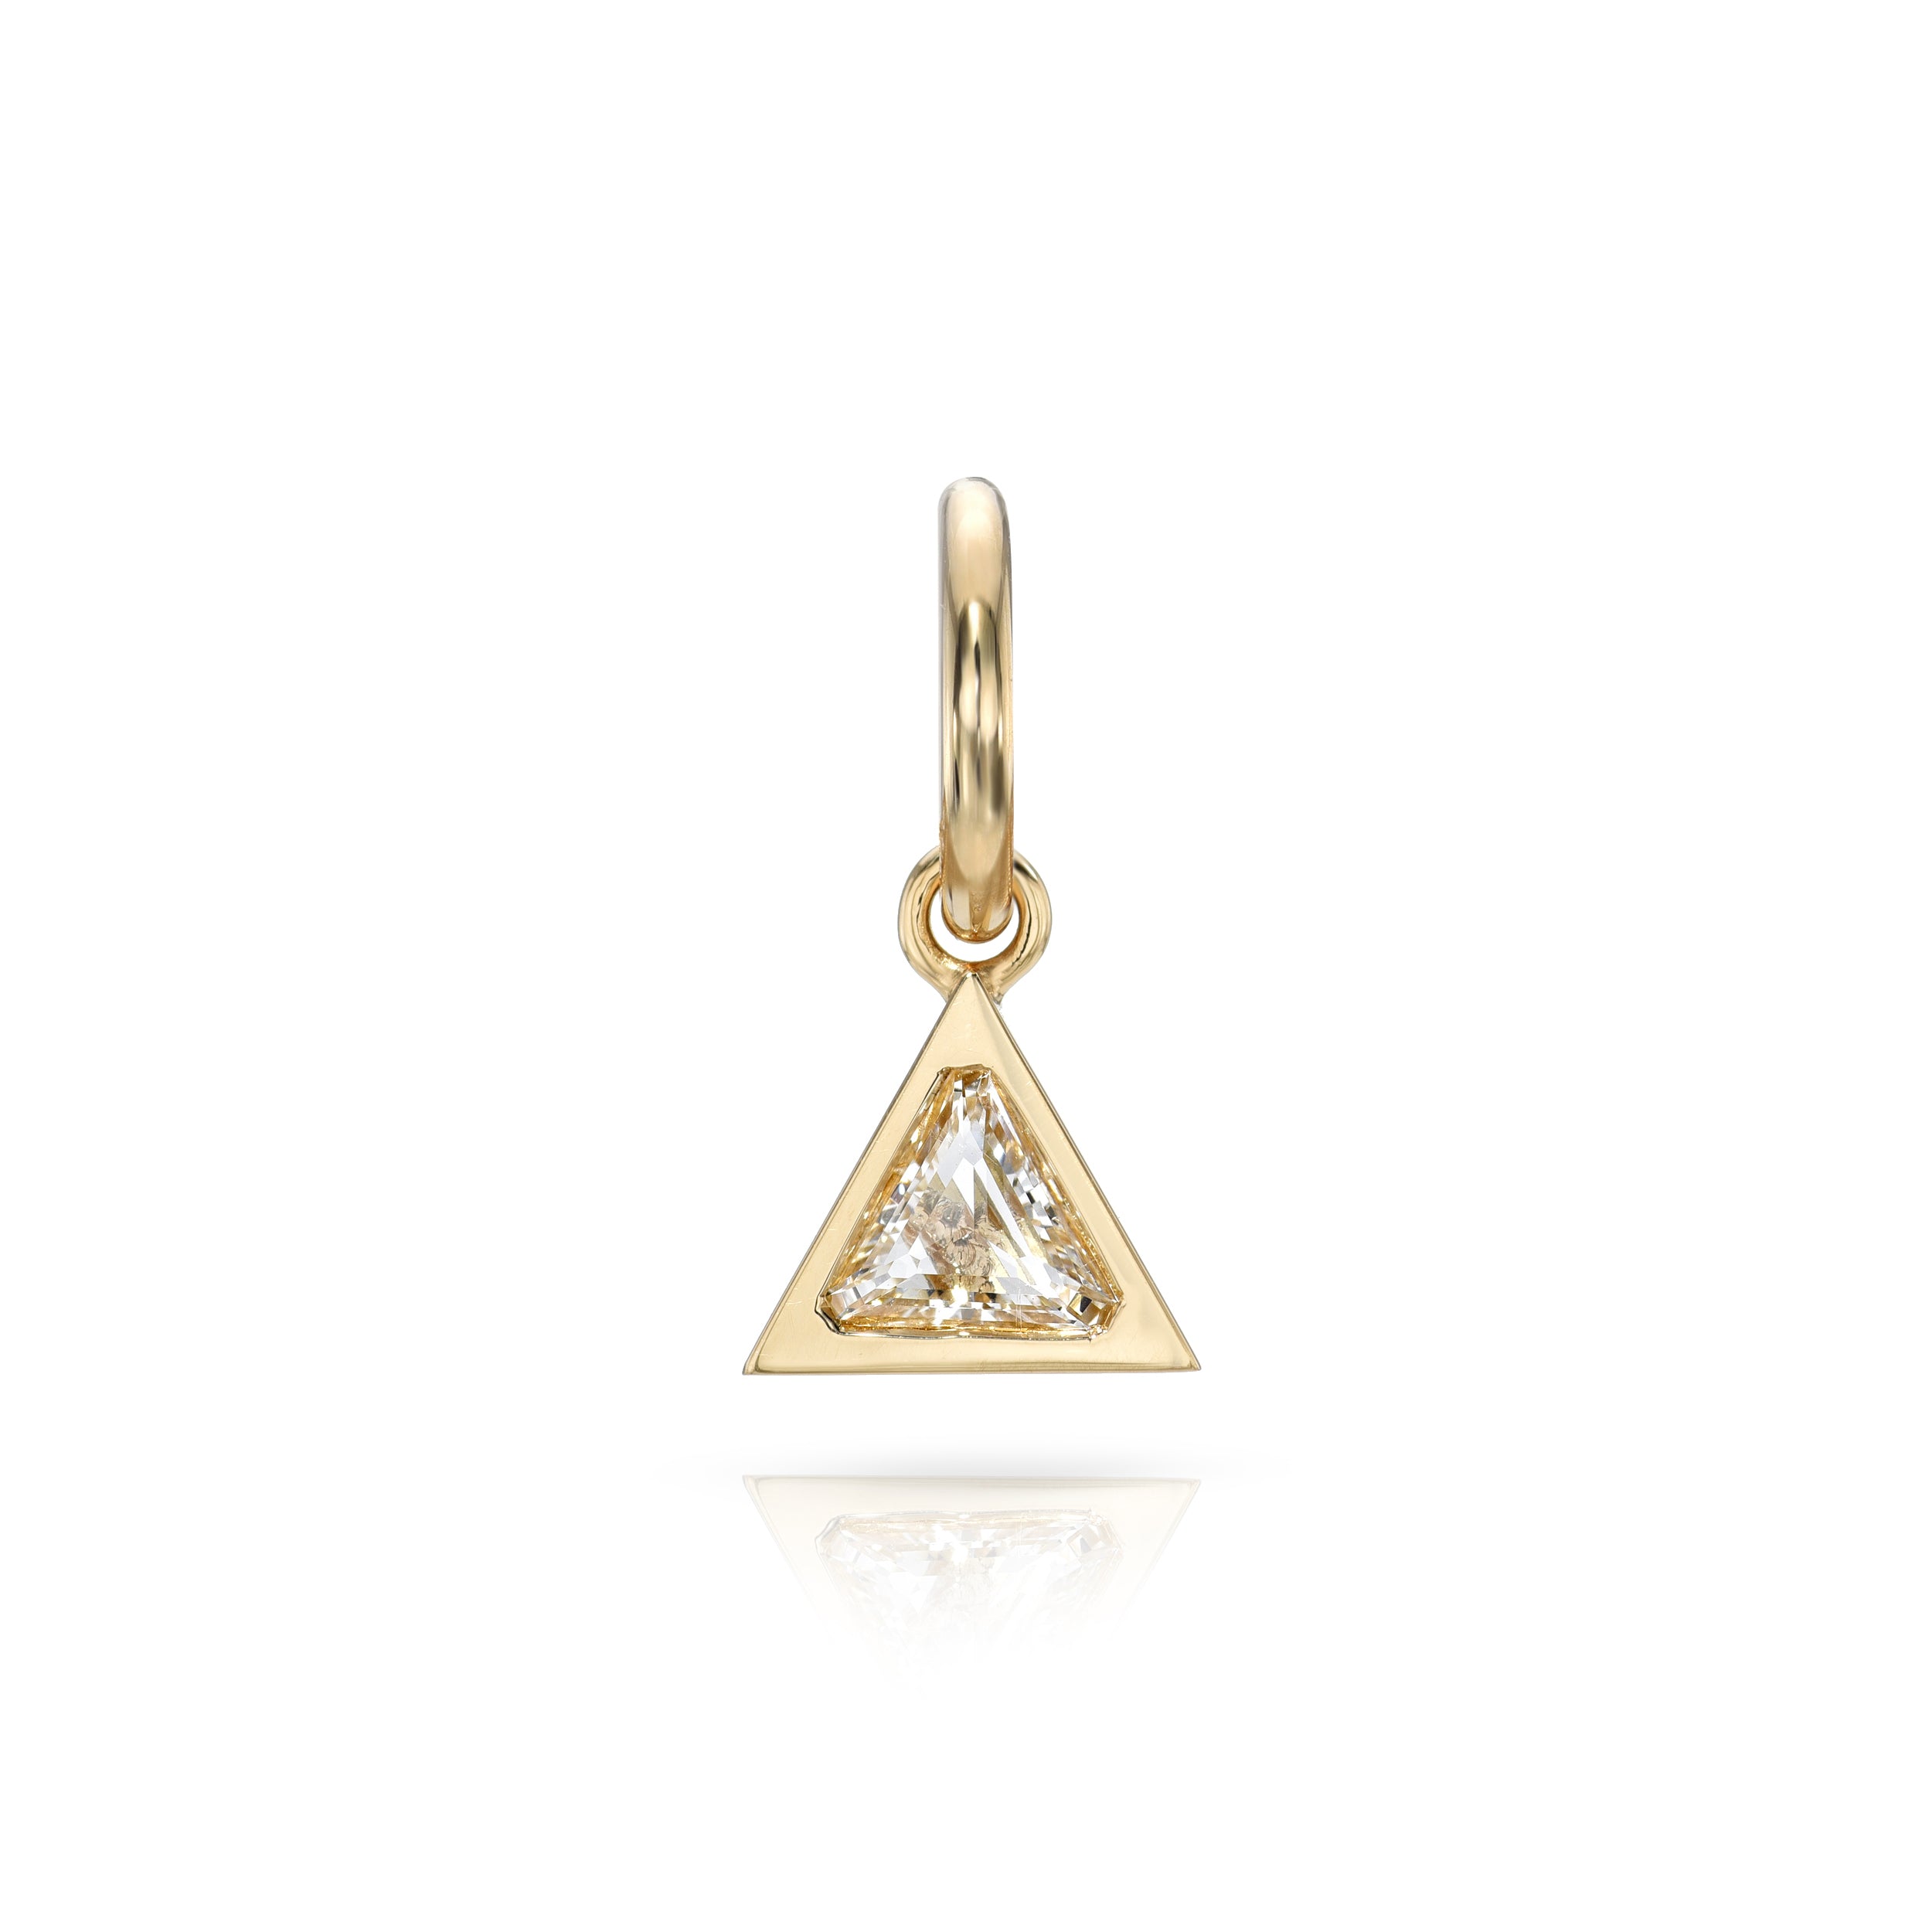 SINGLE STONE SLOANE PENDANT PENDANT featuring 0.27ct D/SI1 GIA certified trillion cut diamond bezel set in a handcrafted 18K yellow gold pendant. Price does not include chain.